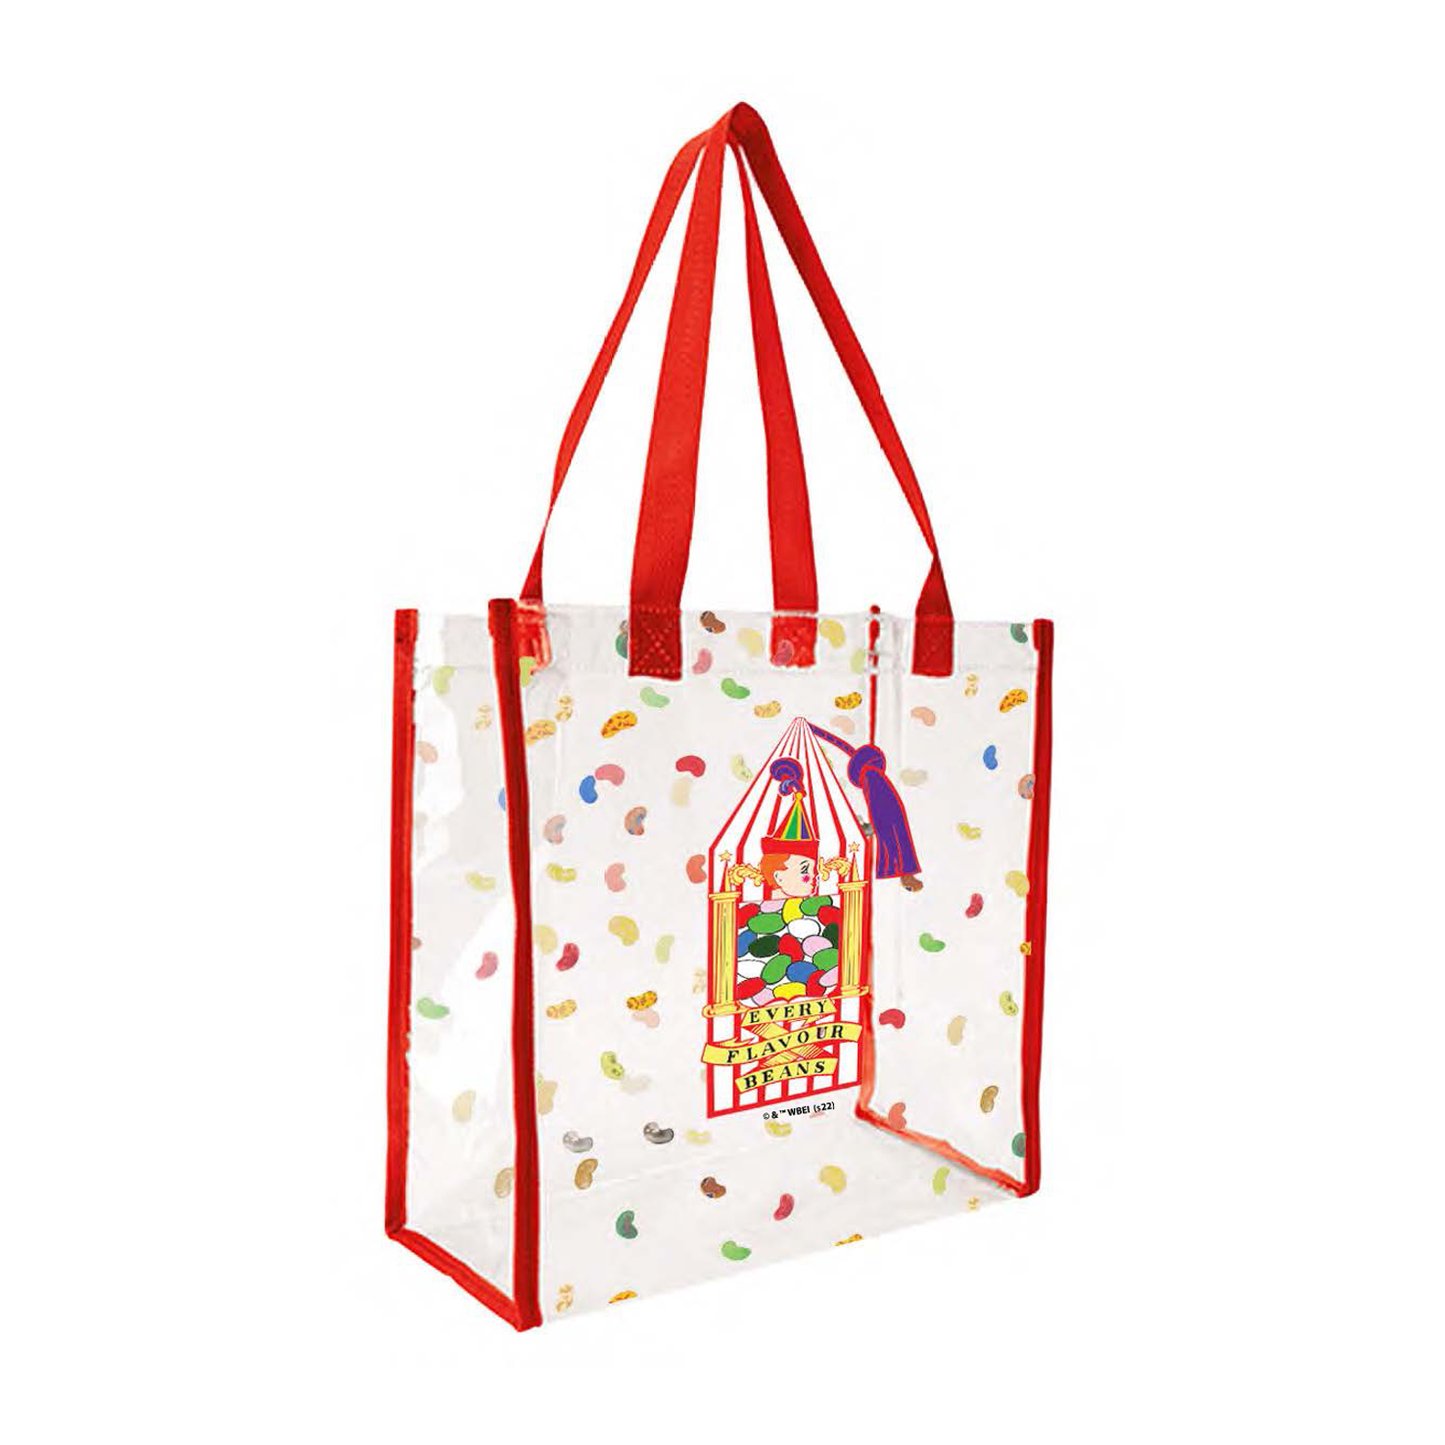 Bertie Bott's Every-Flavour Beans™ Tote